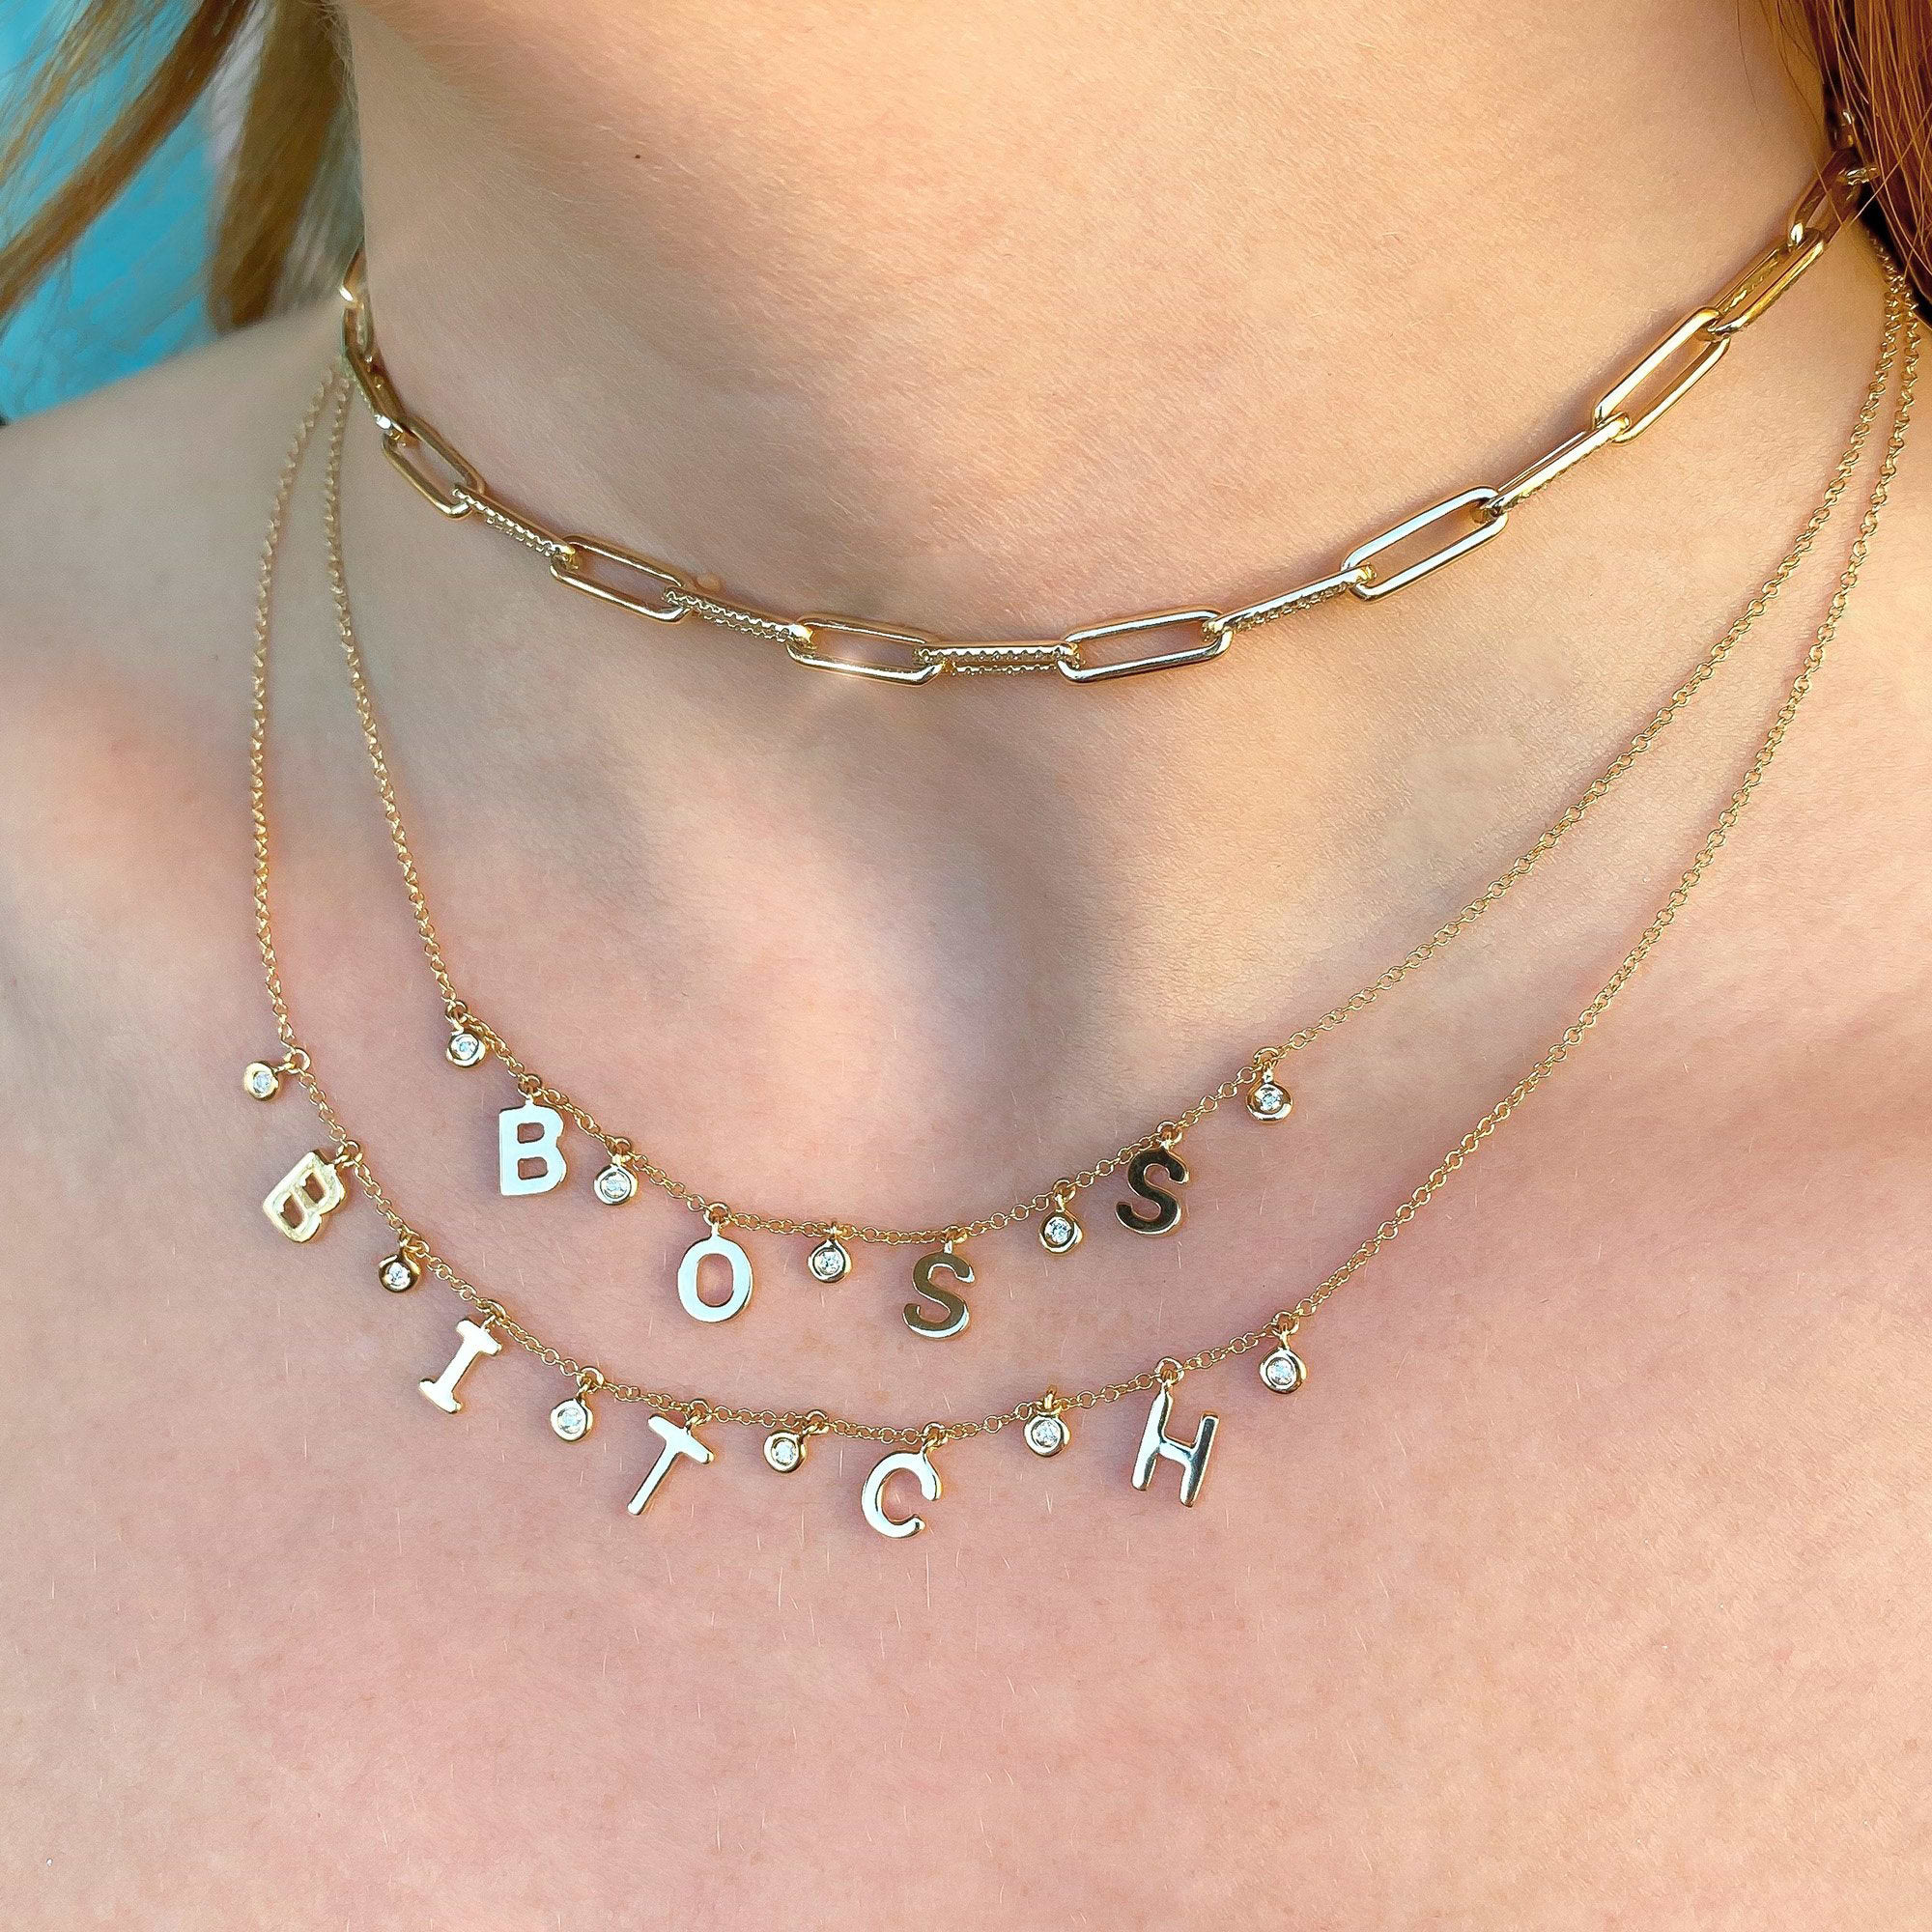 Diamond Boss Spelled Out Pendant Necklace (0.06ct)